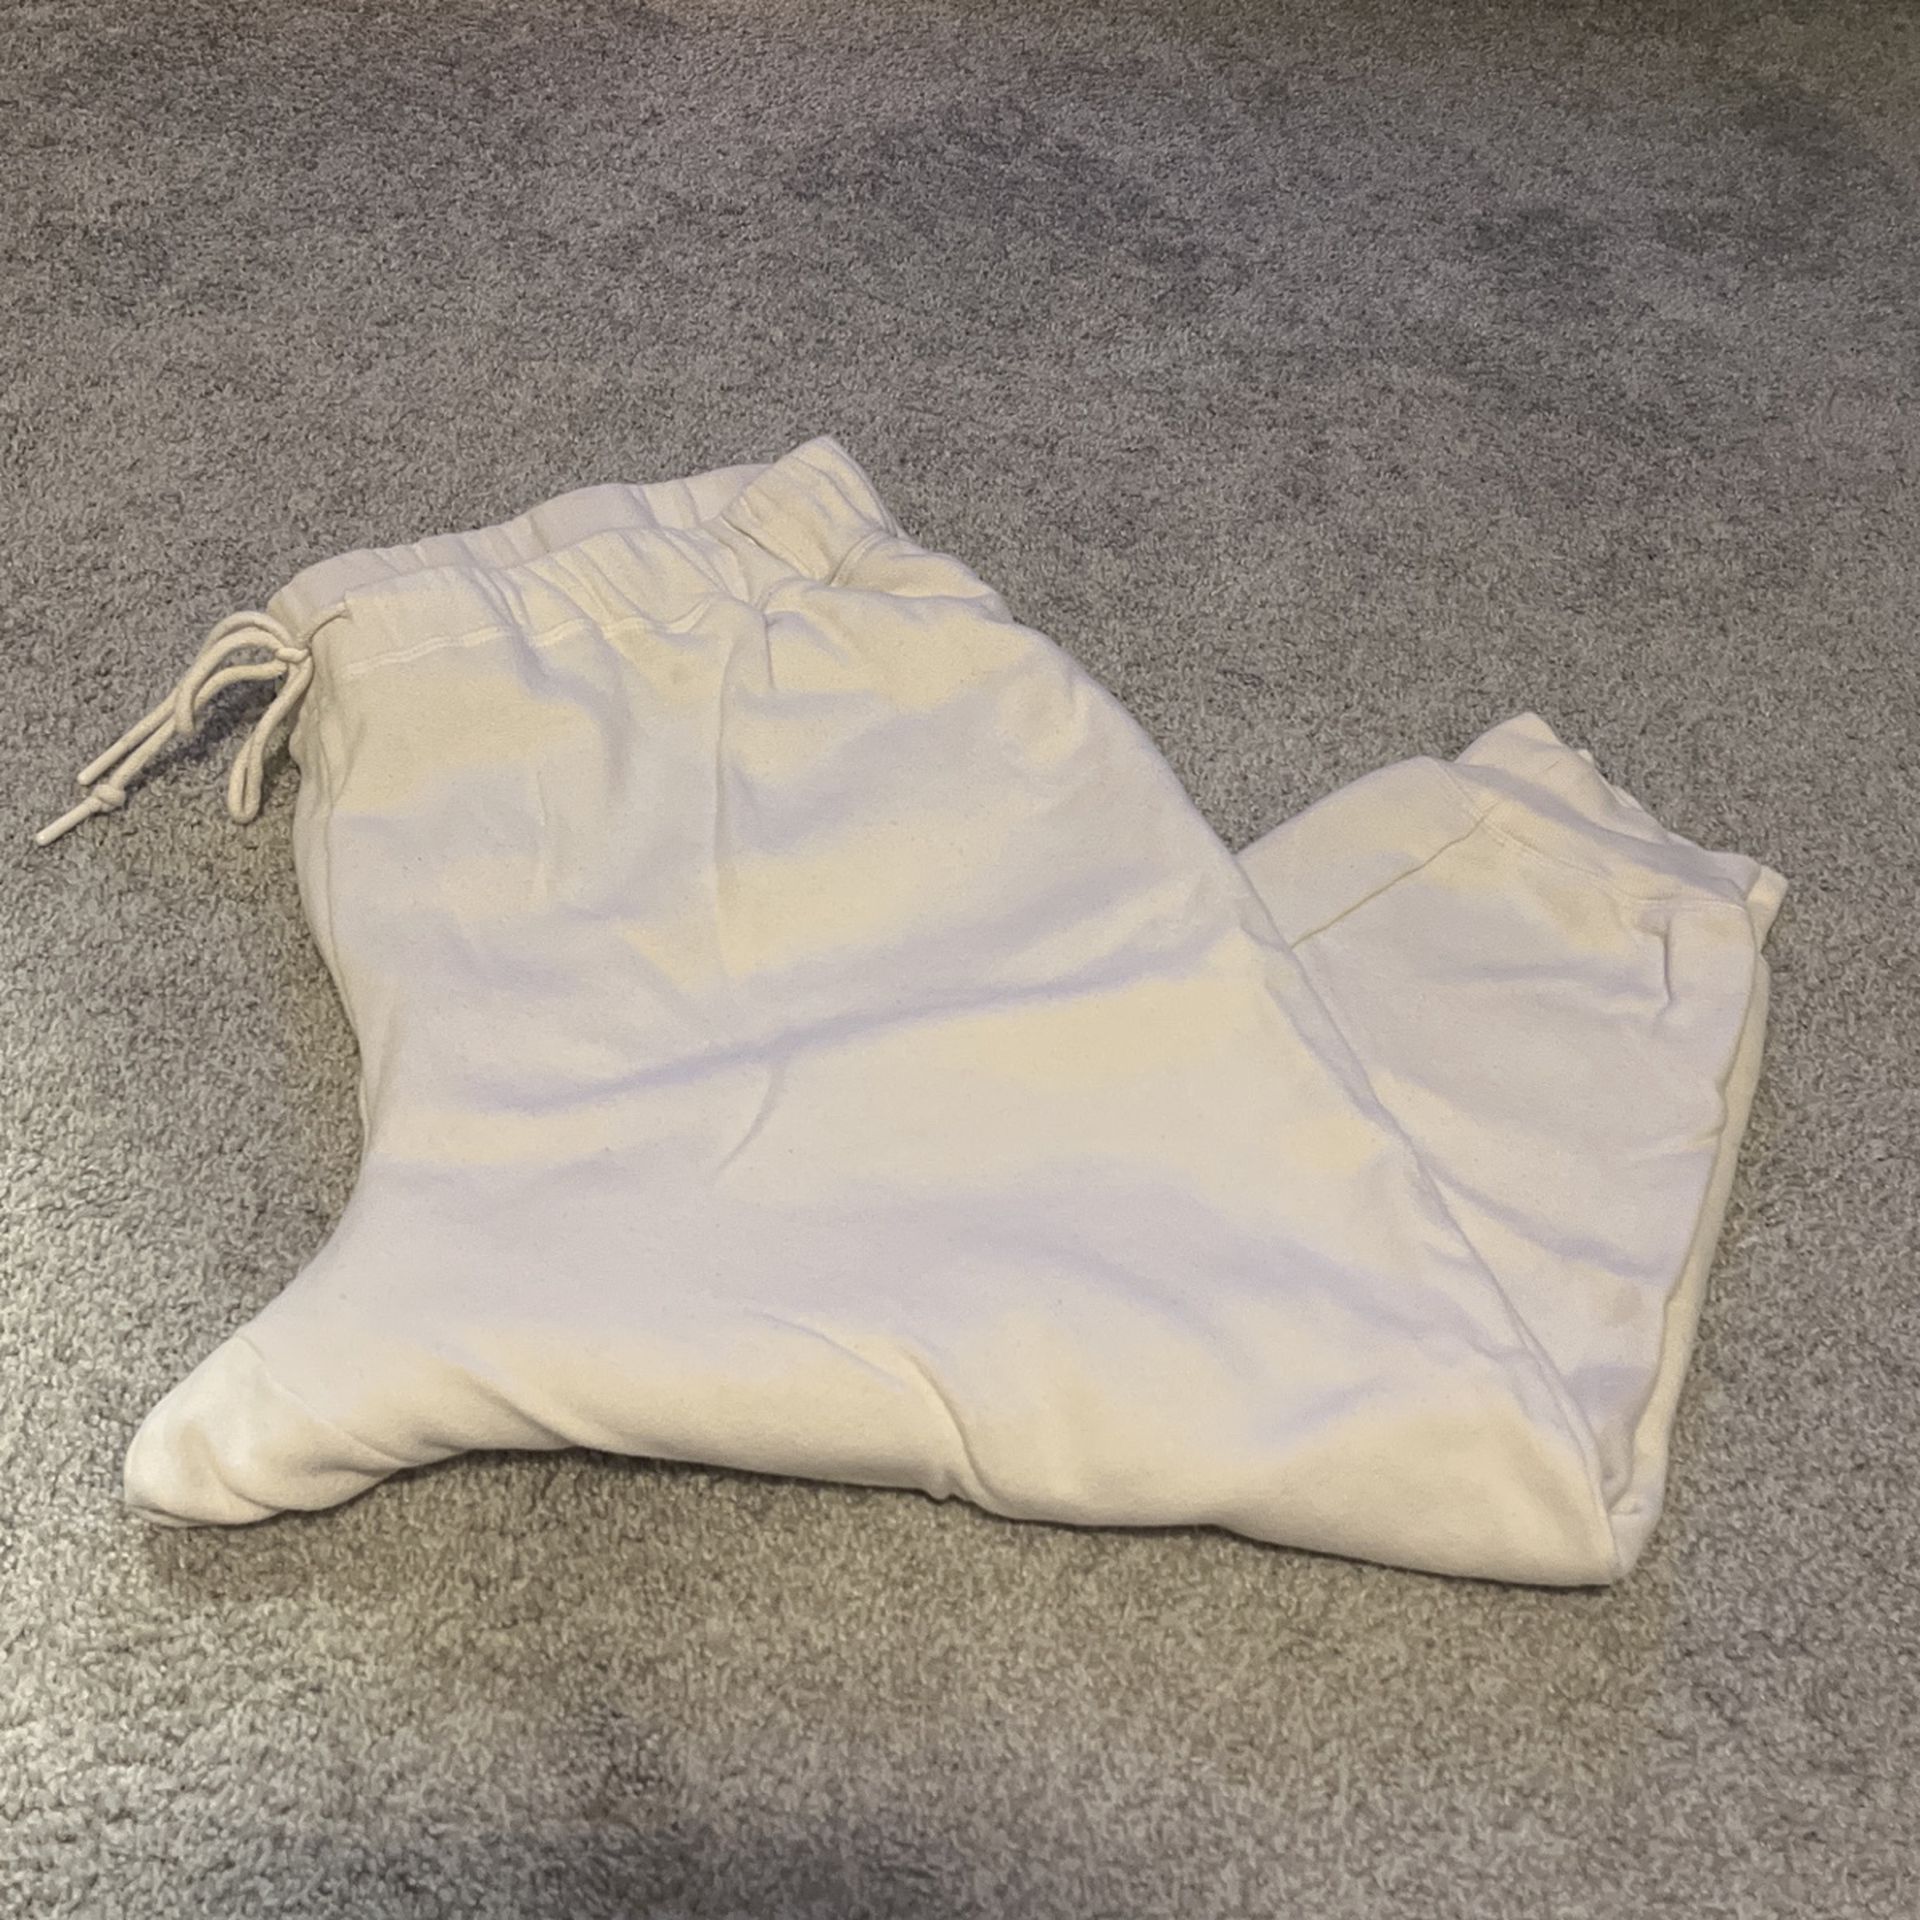 2x Cream Sweatpants for Sale in Ankeny, IA - OfferUp